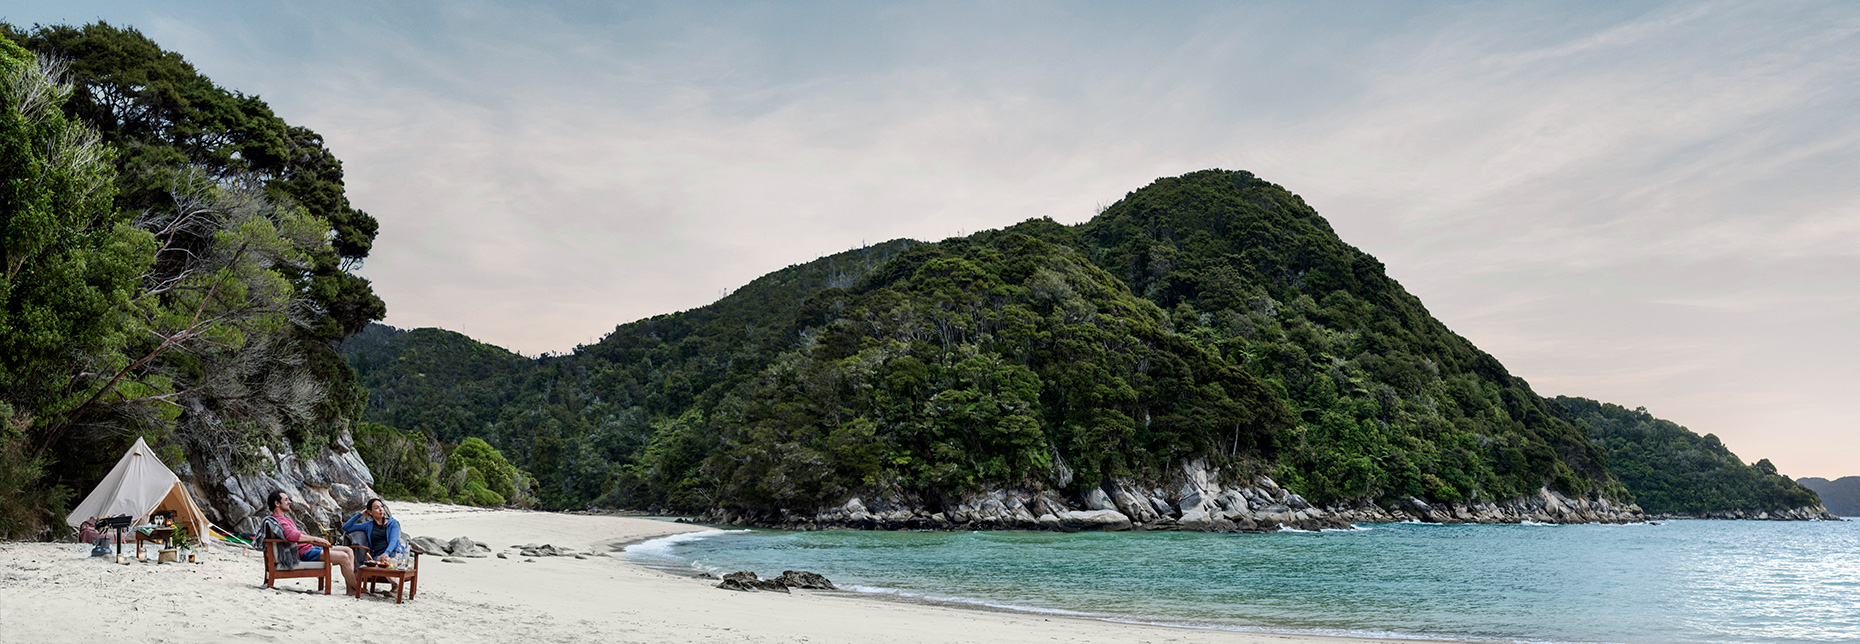 Photography of Abel Tasman by Commercial Photographer Fraser Clements for Tourism New Zealand 100% pure. Close to Nelson New Zealand.